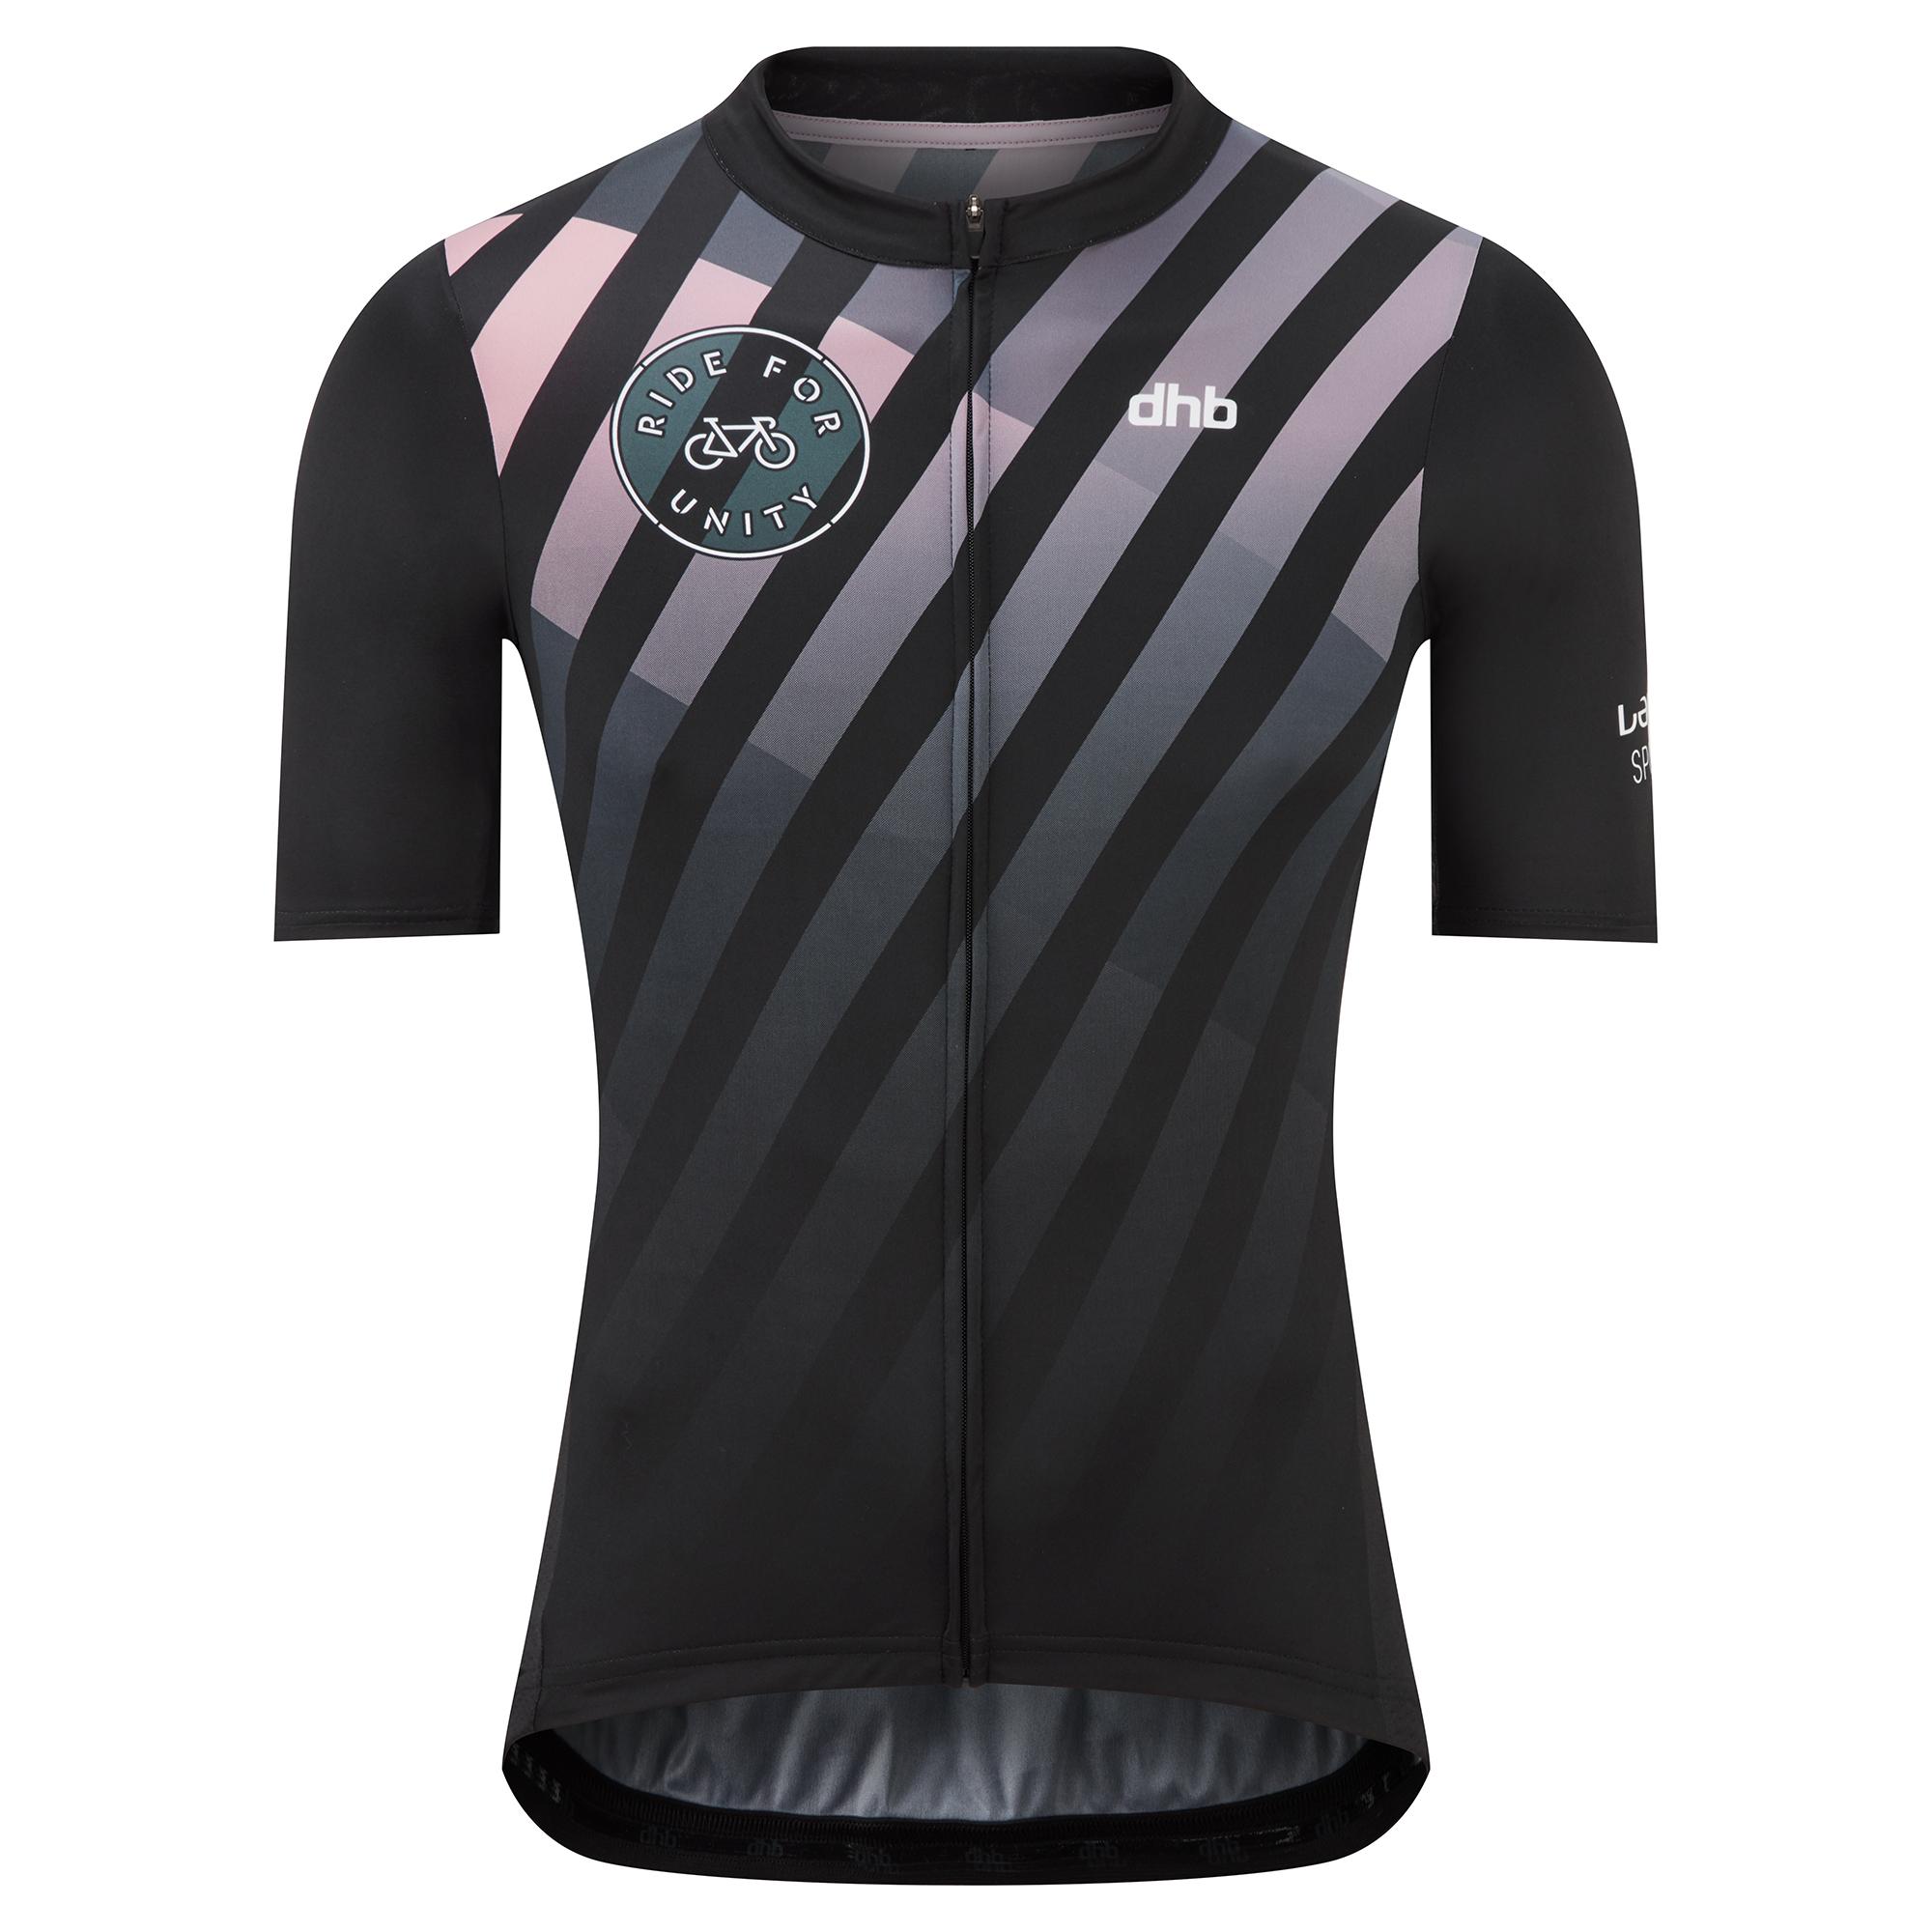 Dhb Ride For Unity Short Sleeve Jersey - Black/pink